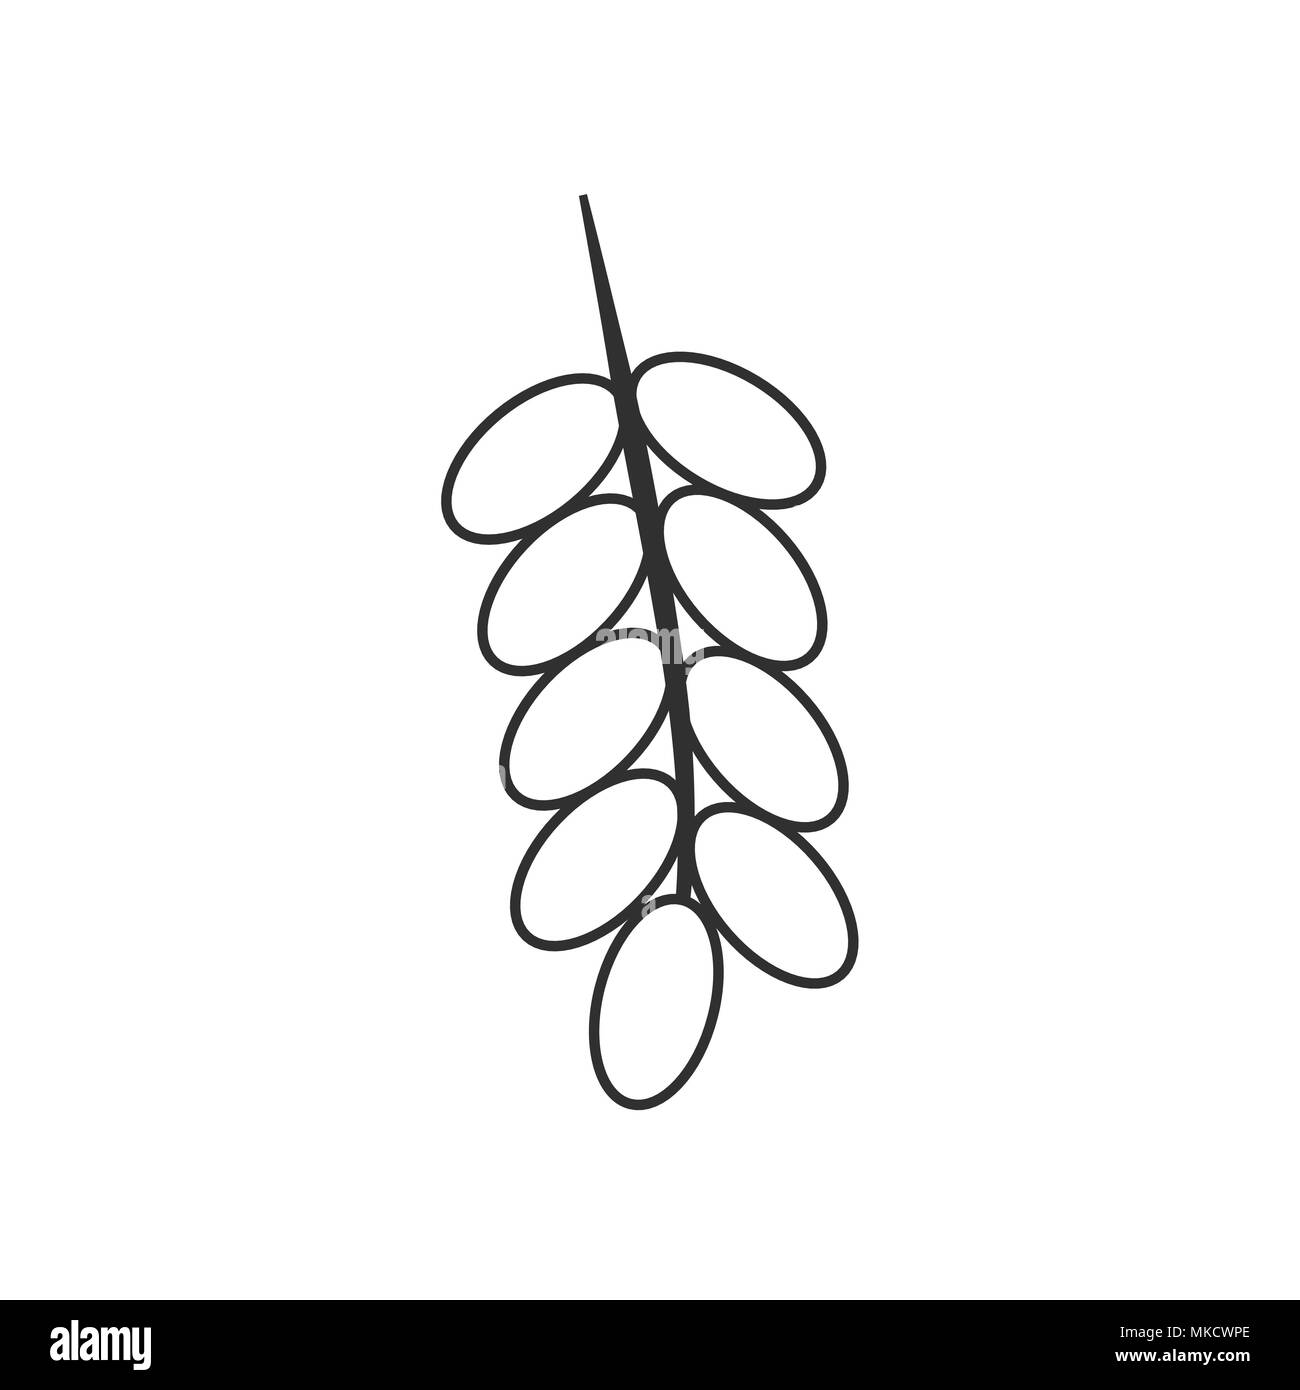 Branch of date palm fruit icon in black flat outline design. Stock Vector